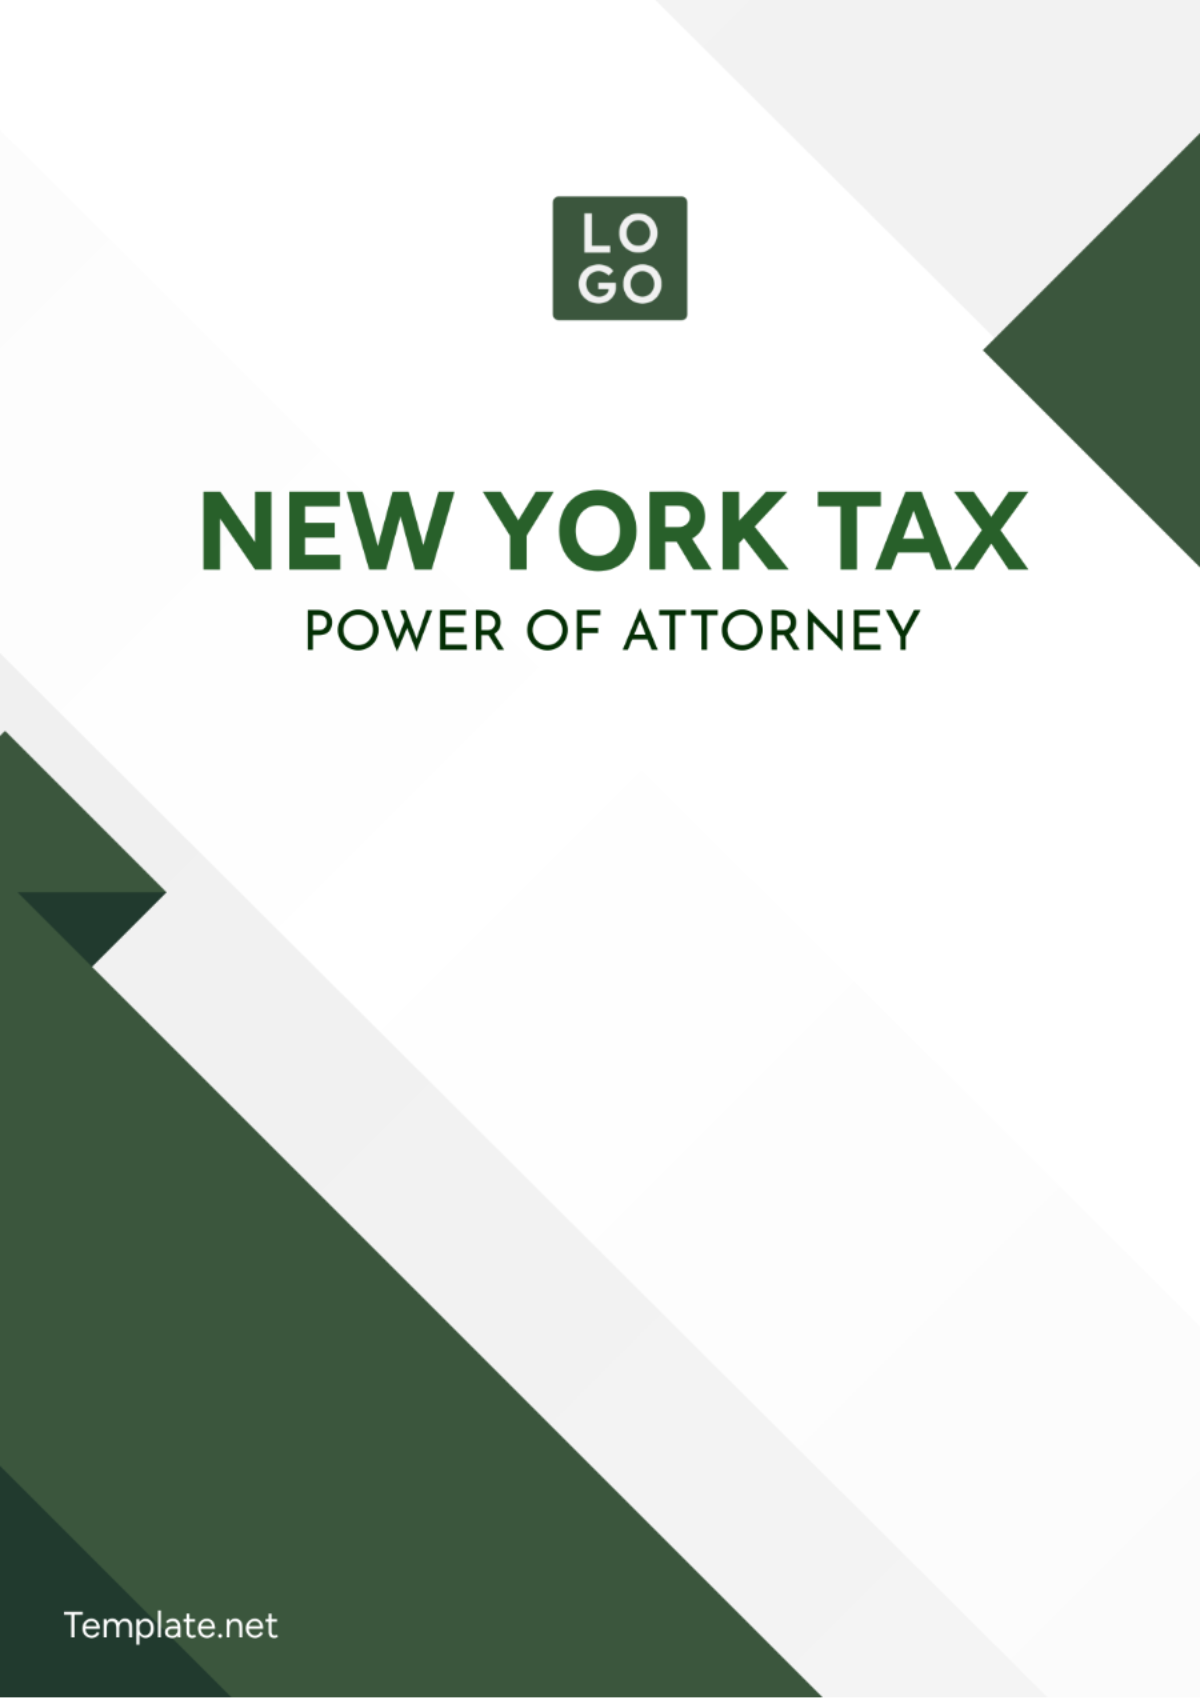 Free New York Tax Power of Attorney Template